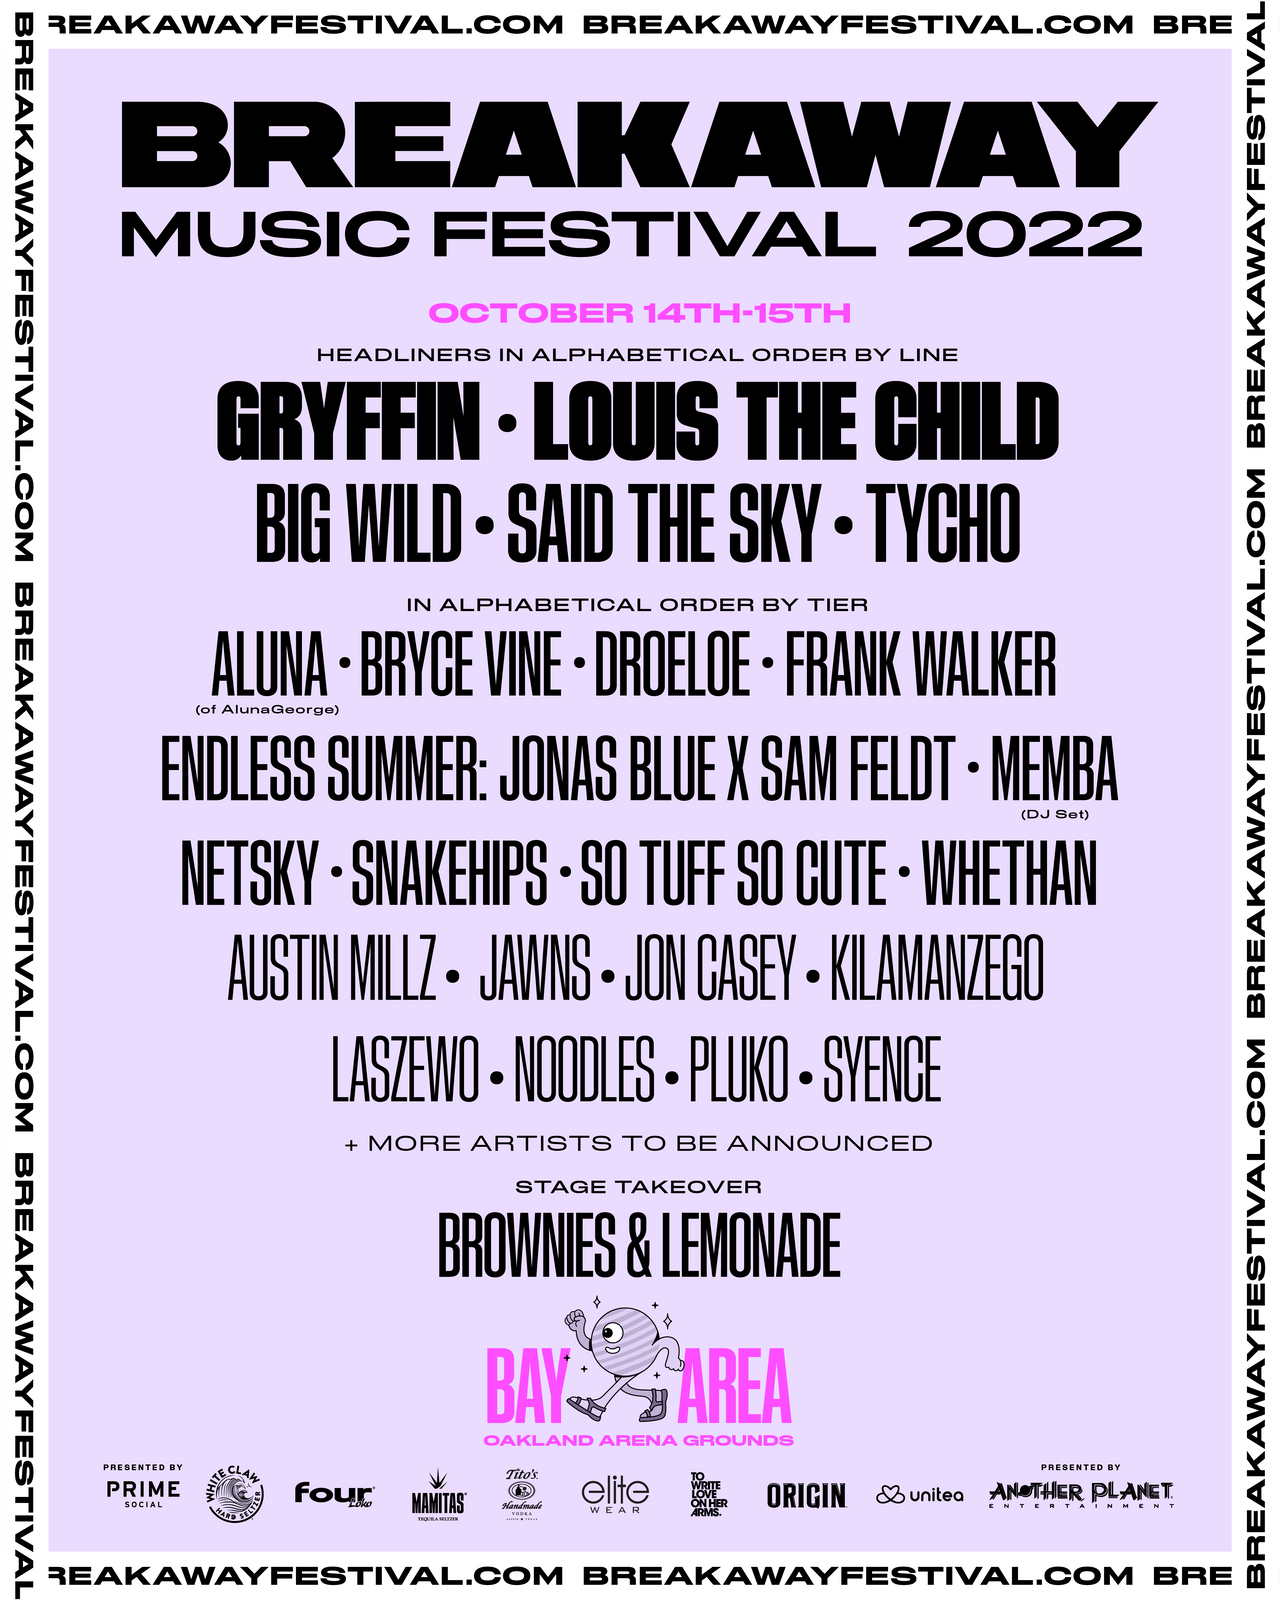 Breakaway Music Festival Bay Area 2022 Tickets at Oakland Arena